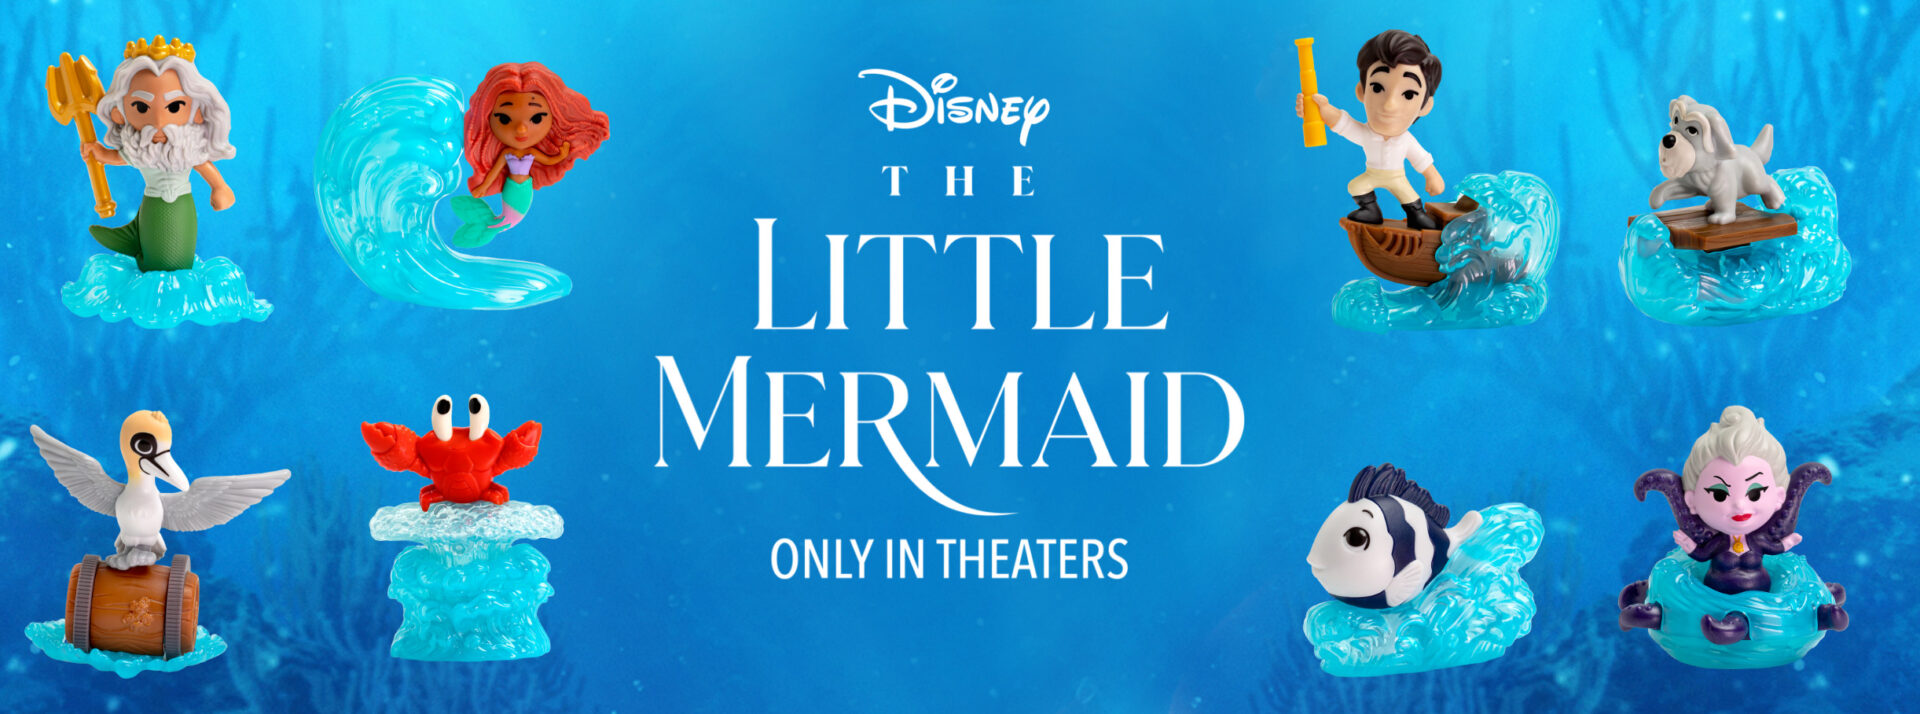 Disney’s Live-Action The Little Mermaid Happy Meal Toys are now at McDonald’s